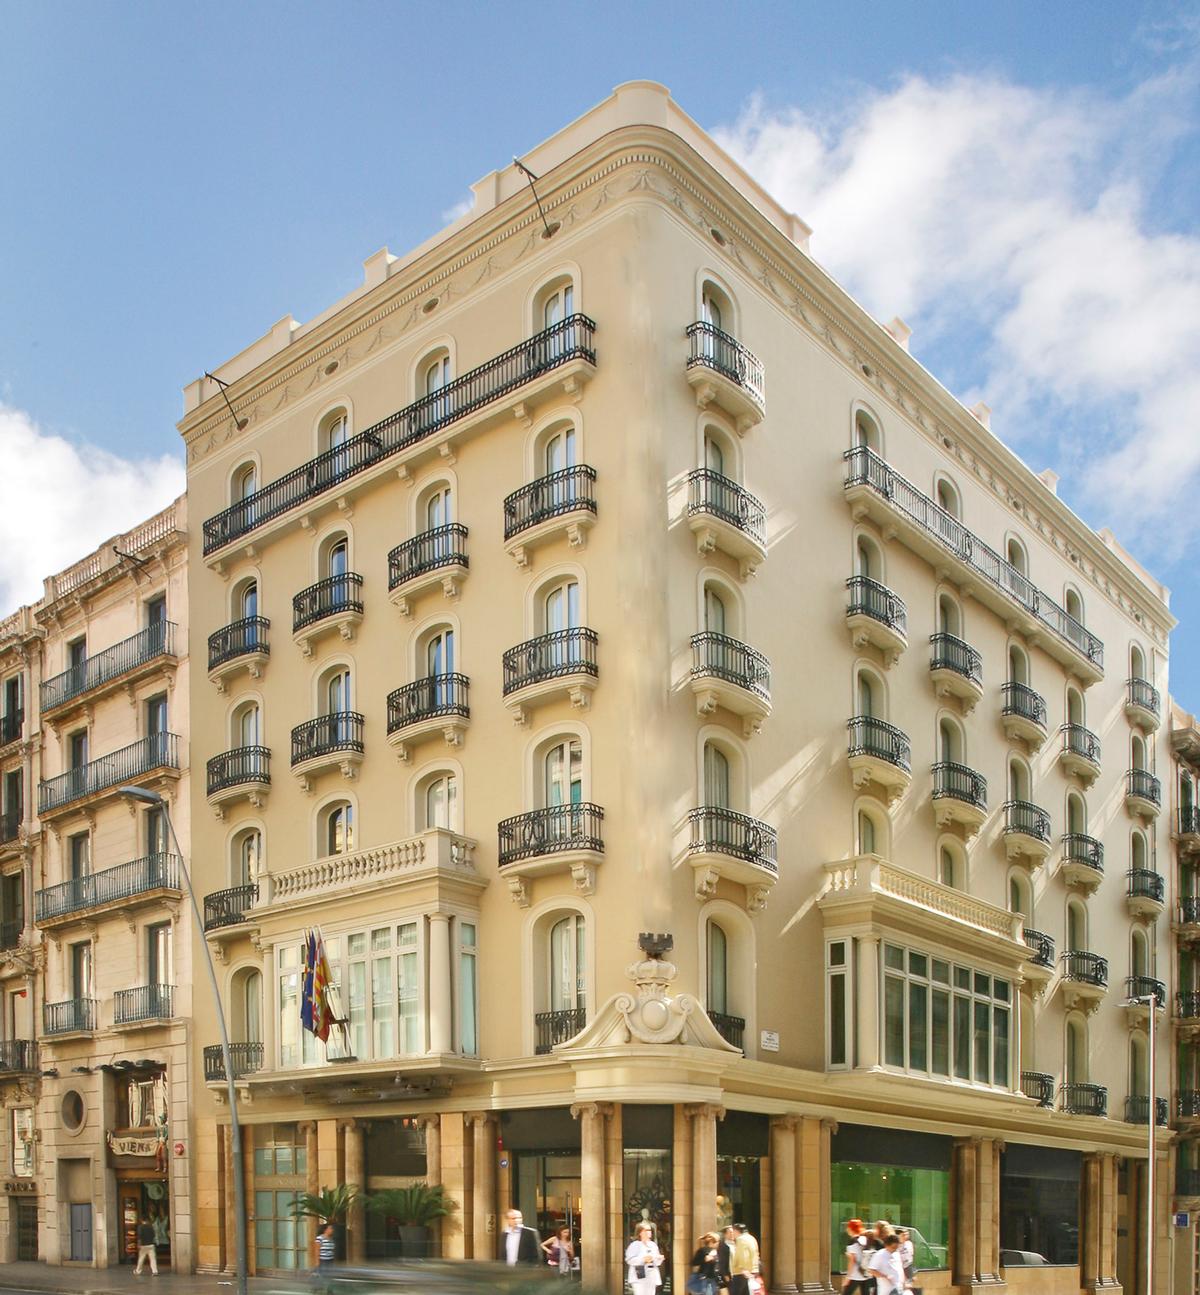 The Midmost Hotel is located in the heart of Barcelona, minutes from both the city’s famous Ramblas and the Sagrada Familia / Midmost Hotel